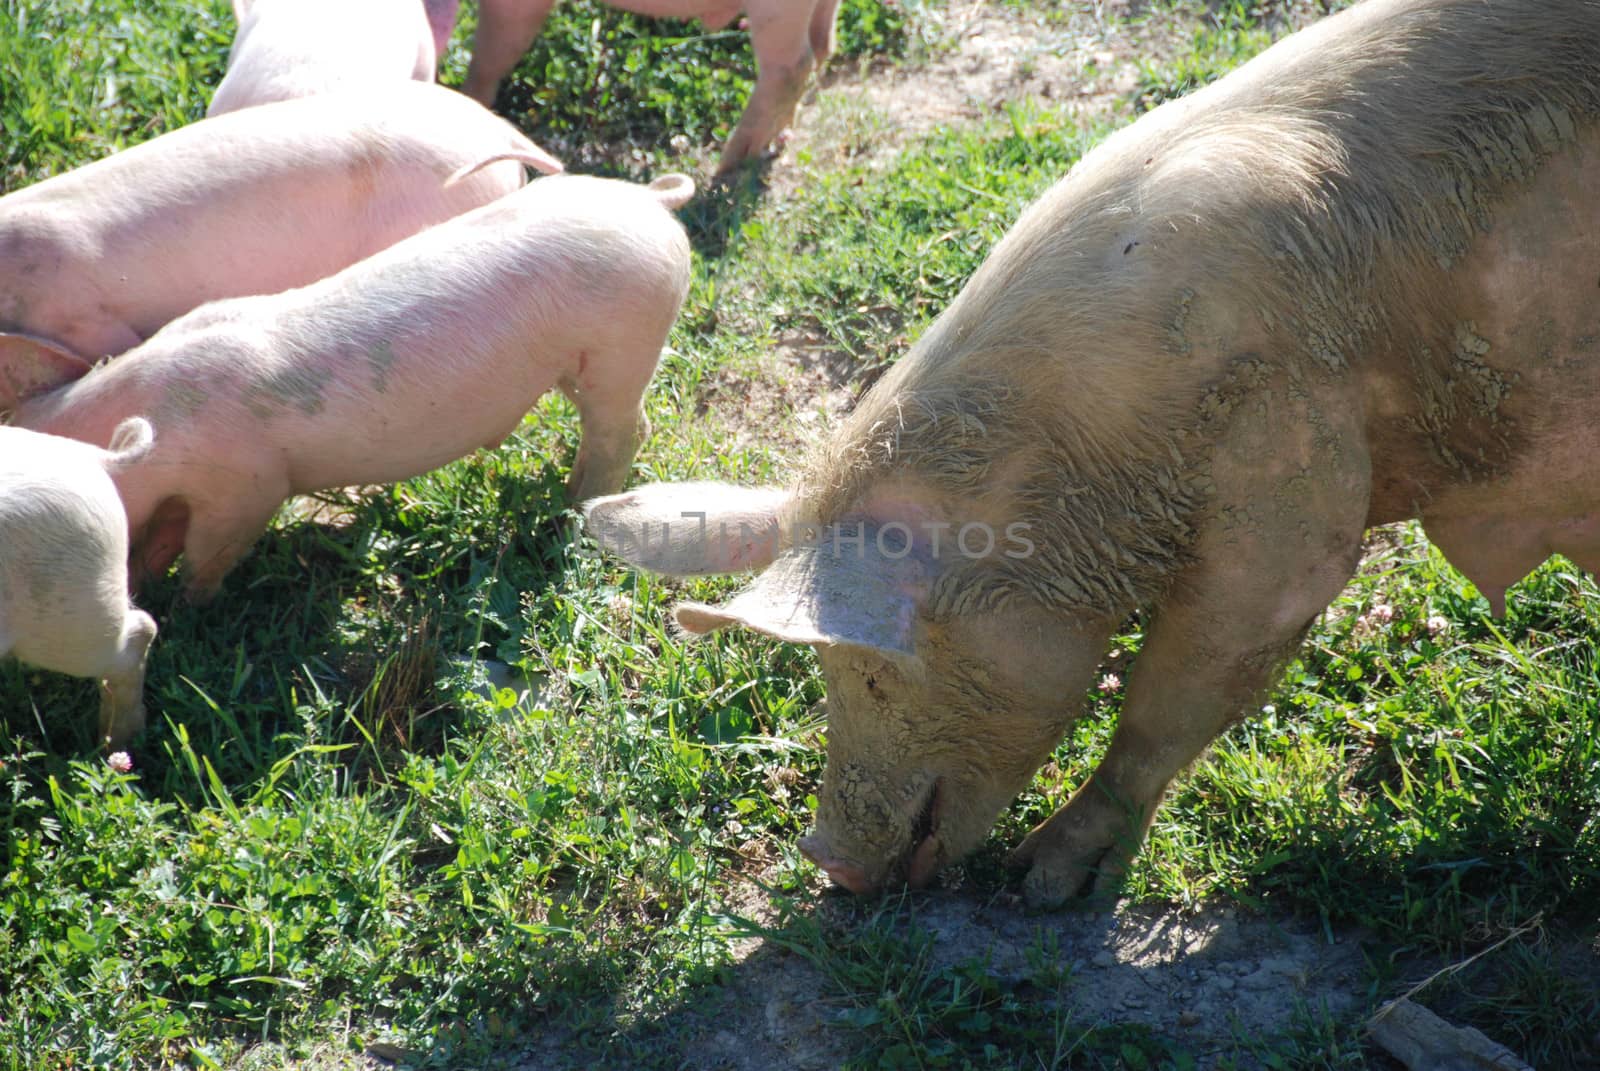 Some piglets looking for food by cosca